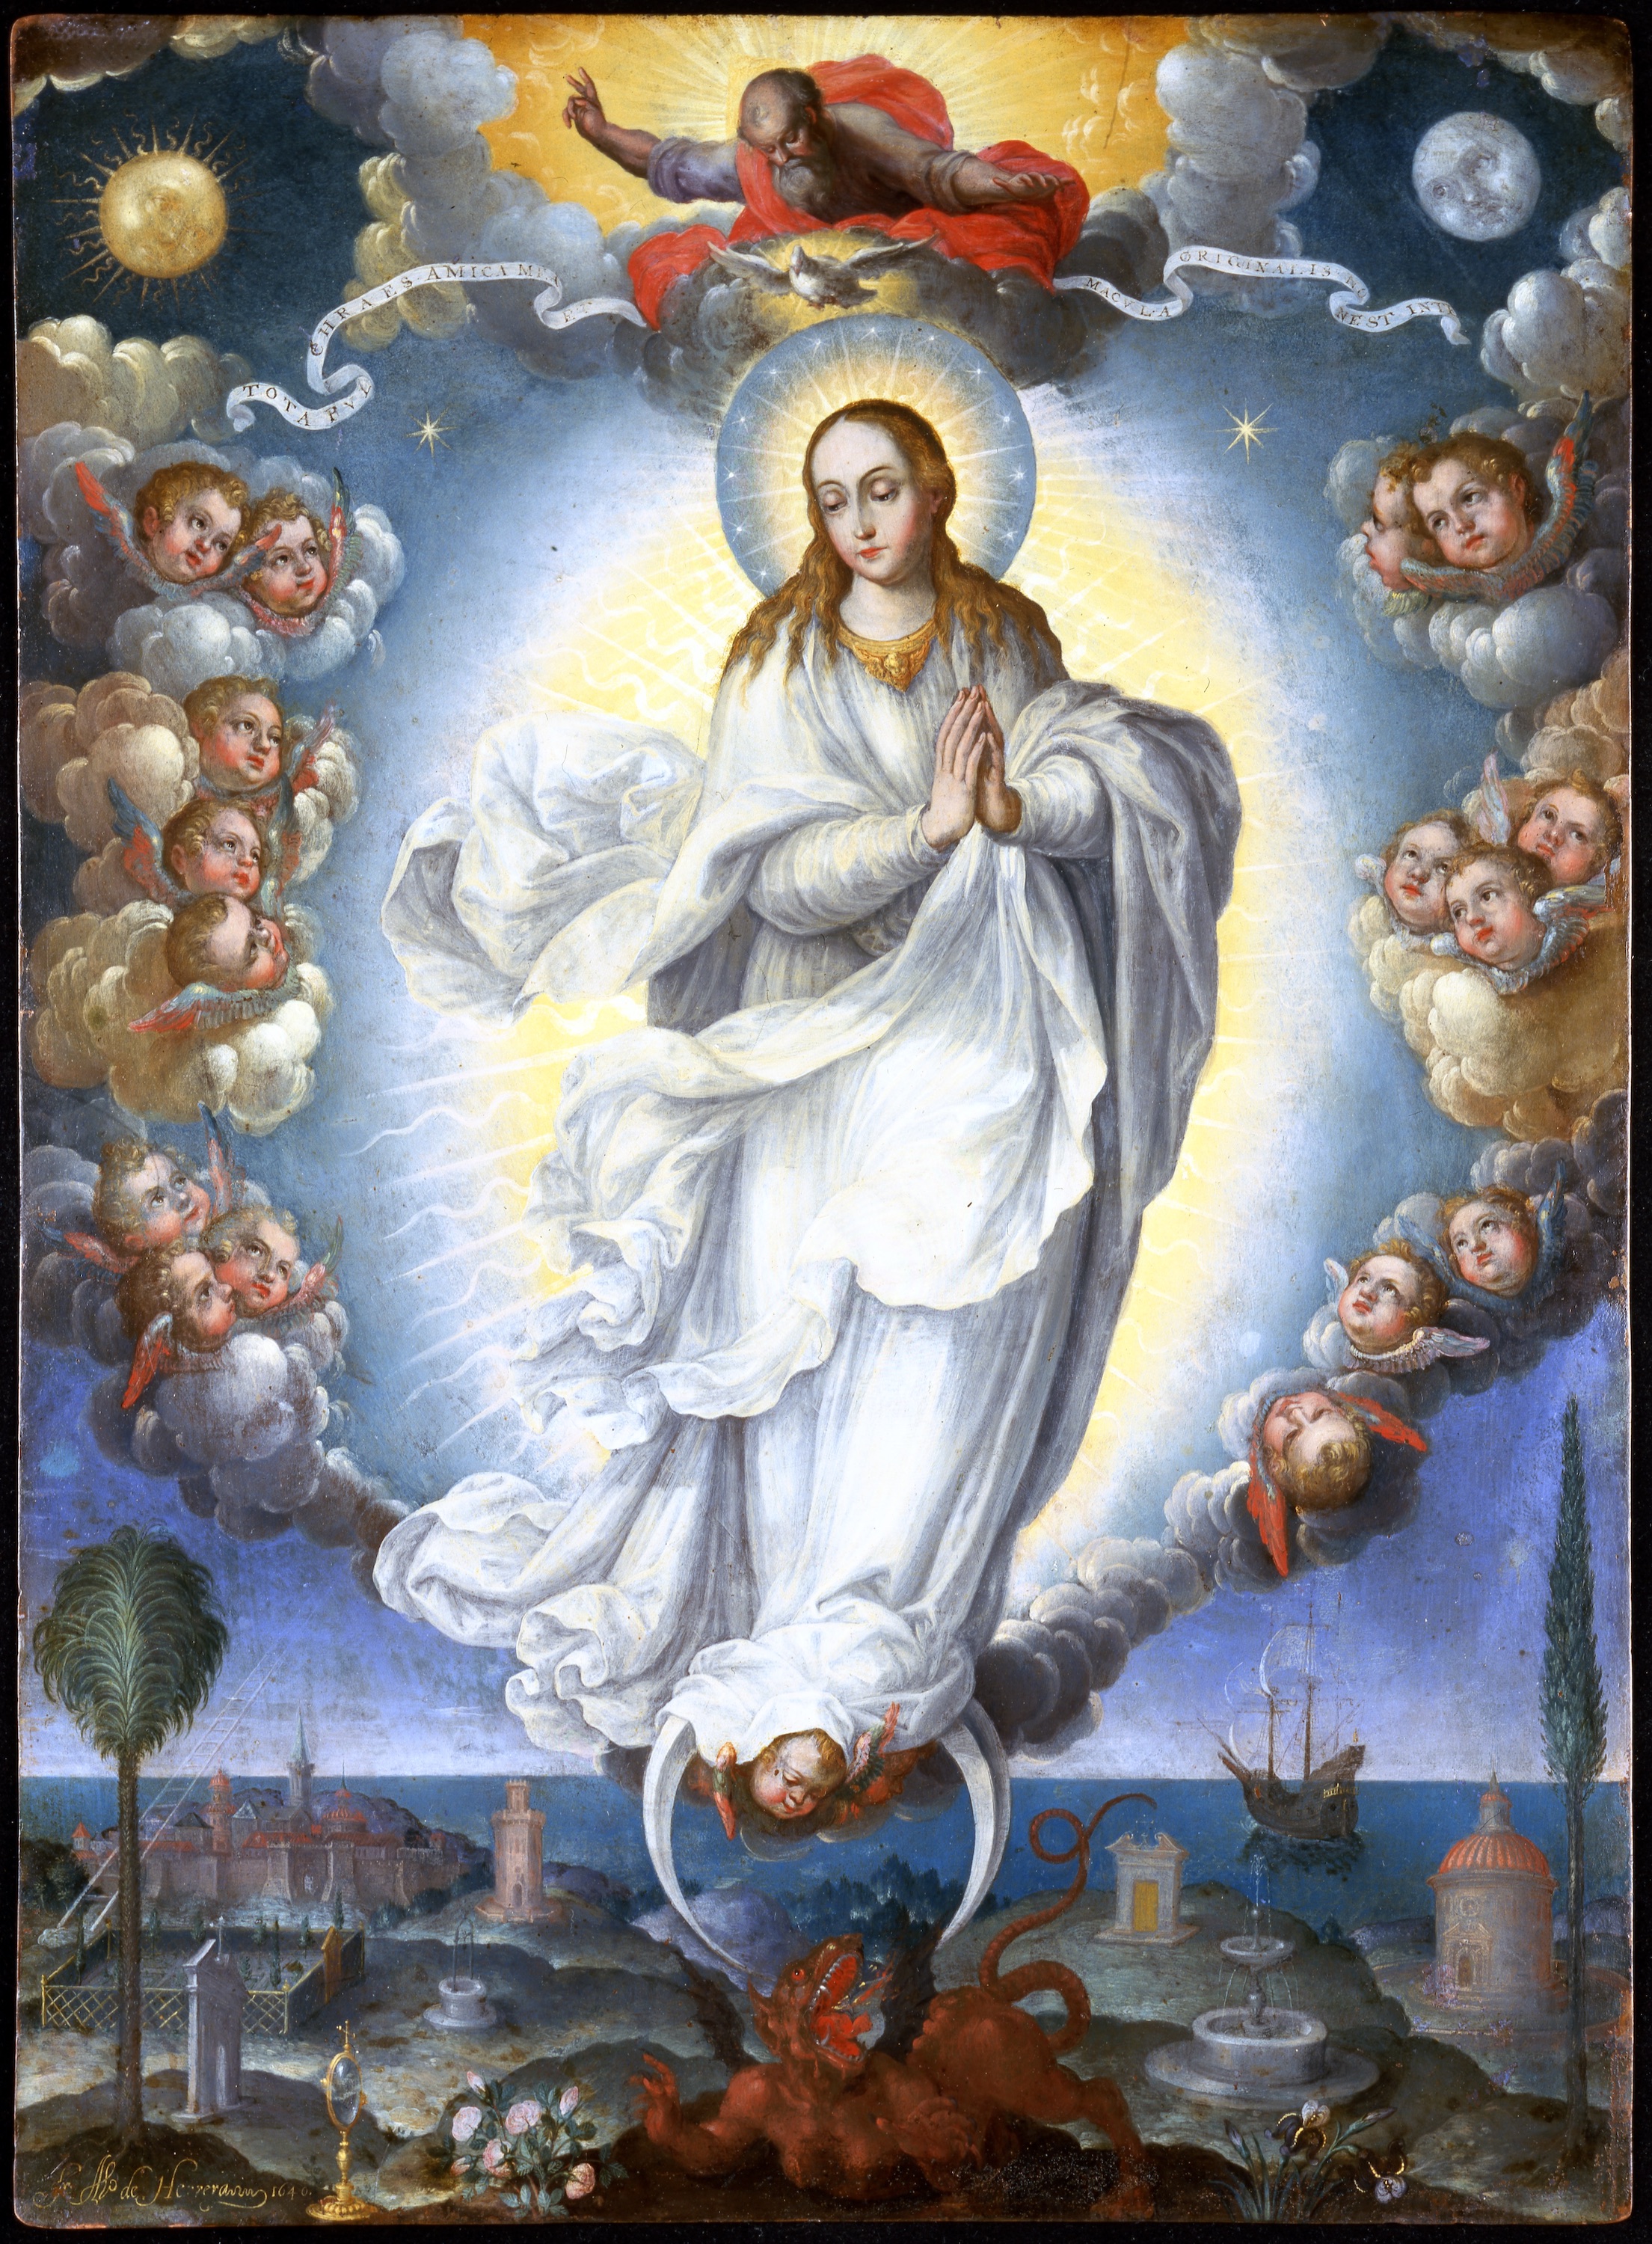 Virgin of the Immaculate Conception by Fray Alonso López de Herrera, O.P. - 1640 - 52.7 × 38.7 cm Hispanic Society Museum & Library